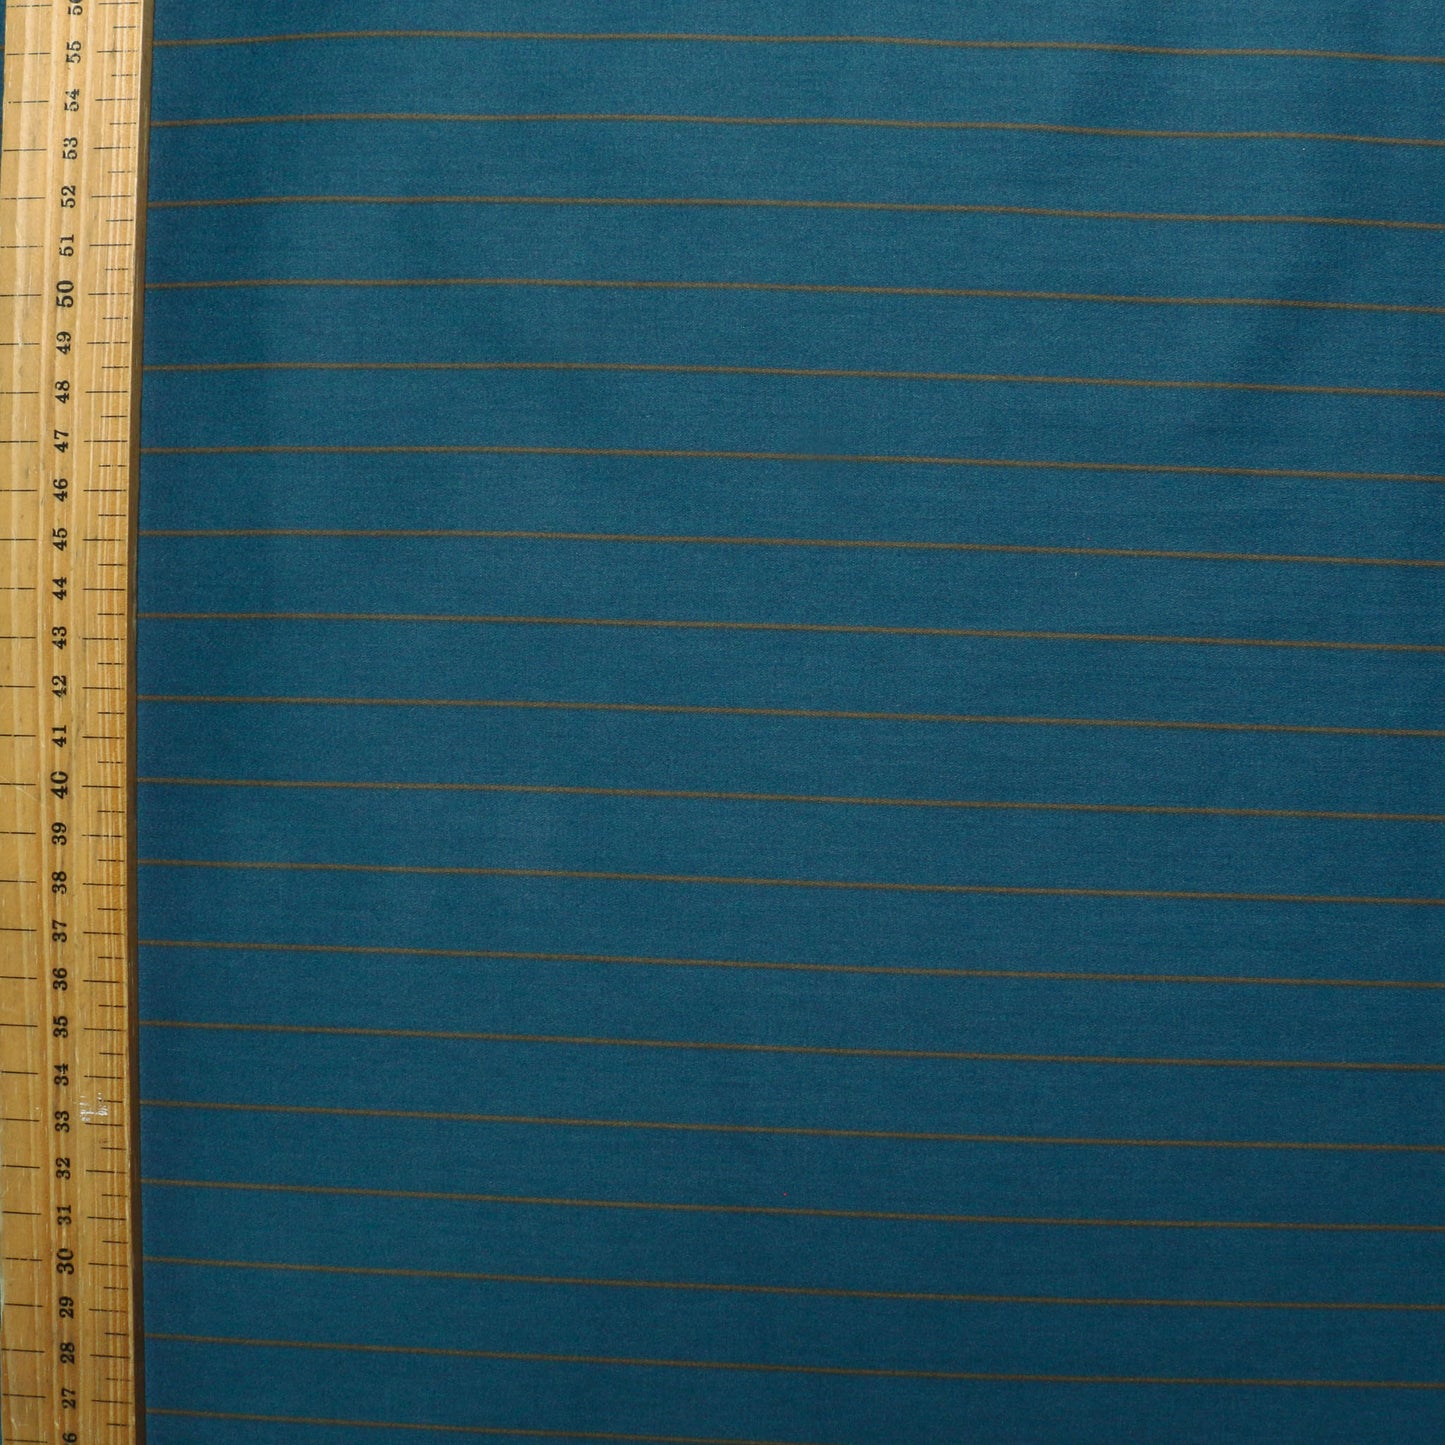 metre cotton pinstripe dressmaking fabric in teal and beige